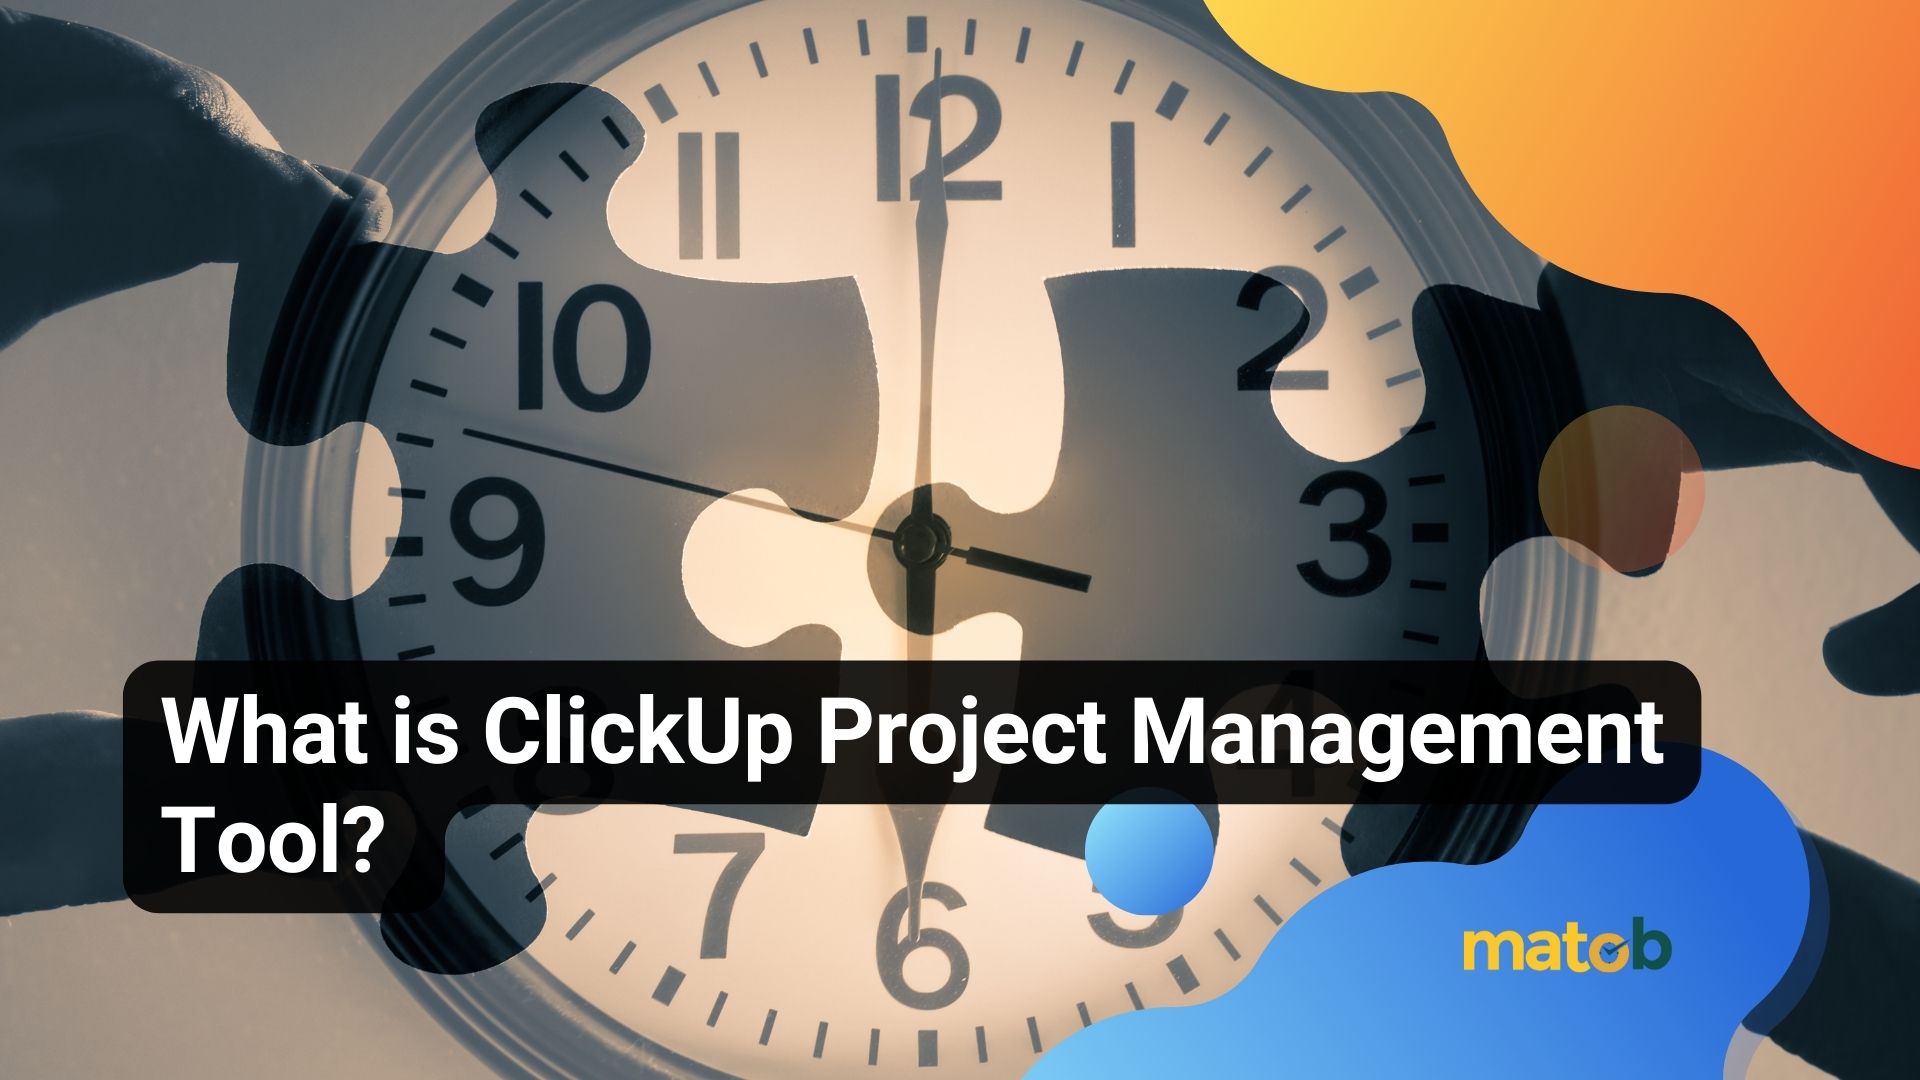 What is ClickUp Project Management Tool?